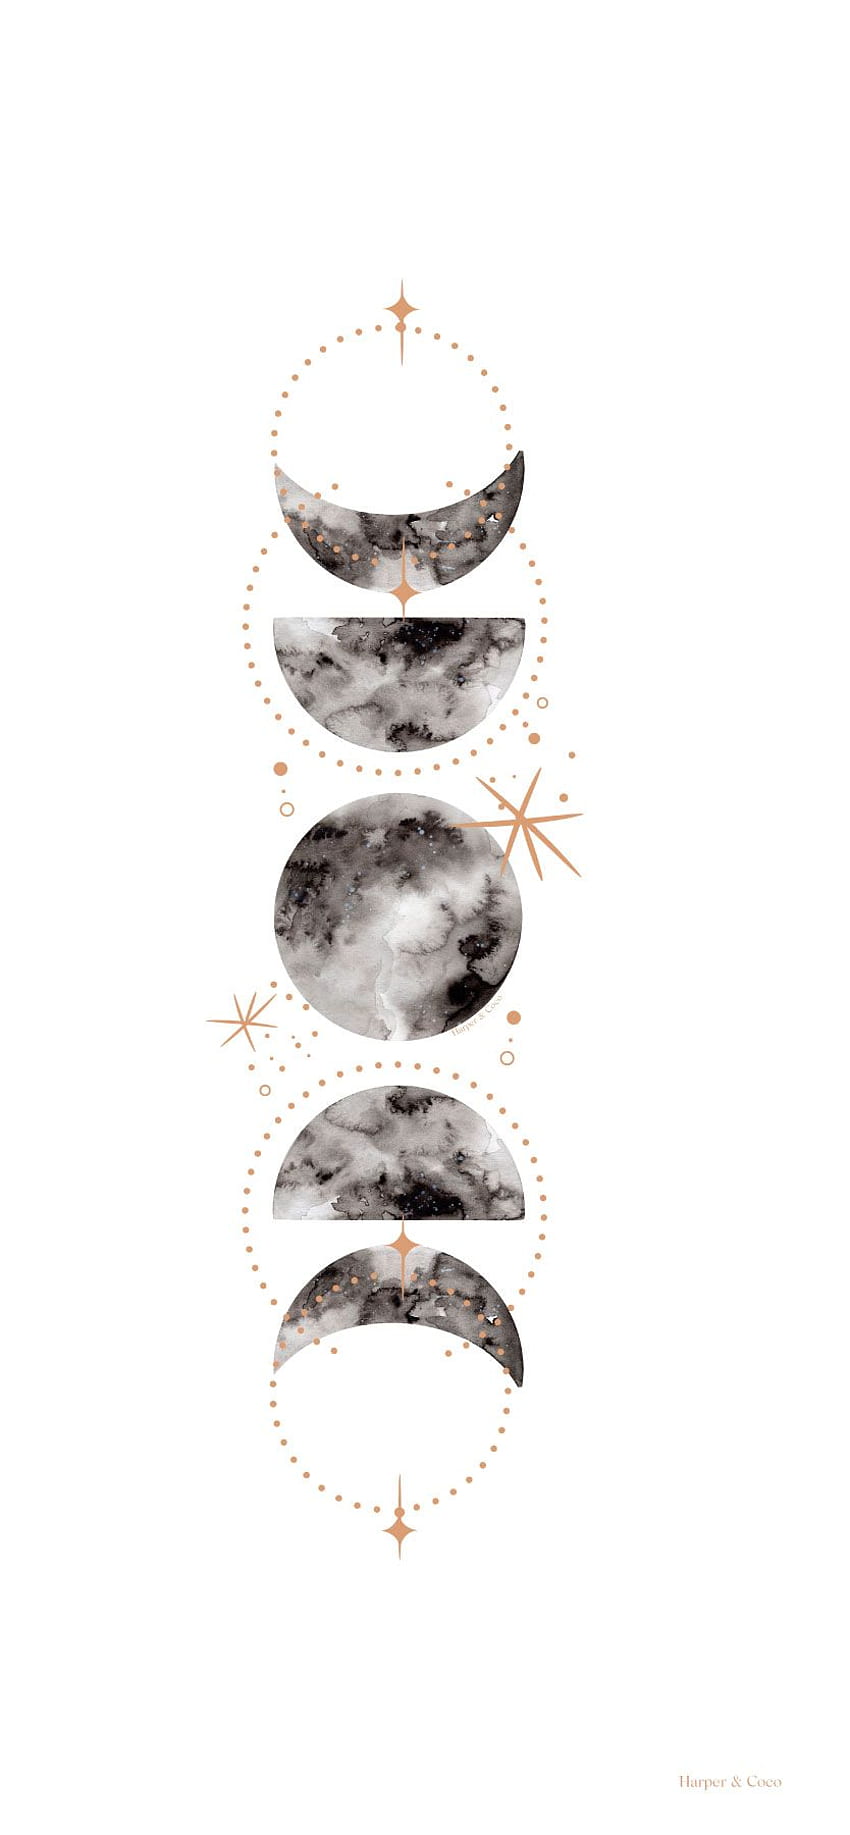 IPhone wallpaper with a marble moon phases design - Moon phases